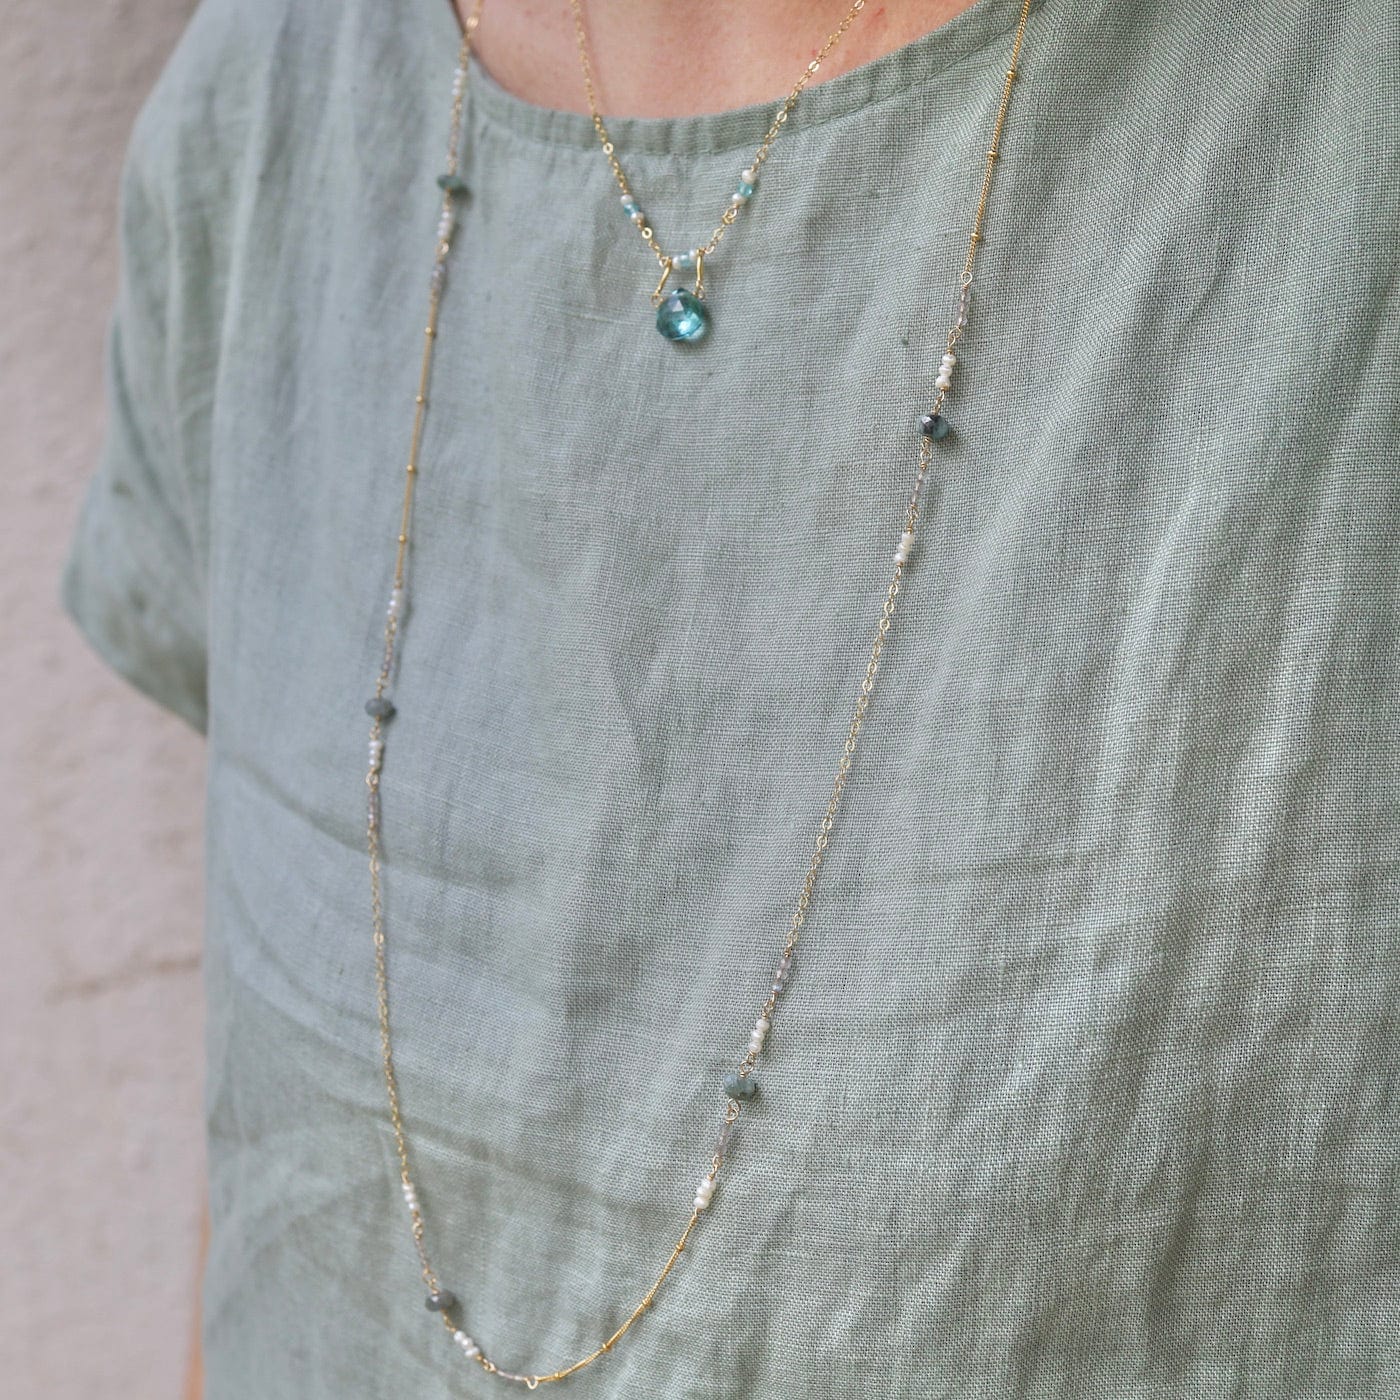 NKL-GF 36" Mixed Gold Filled Chain with Stations of Aquamarine Necklace